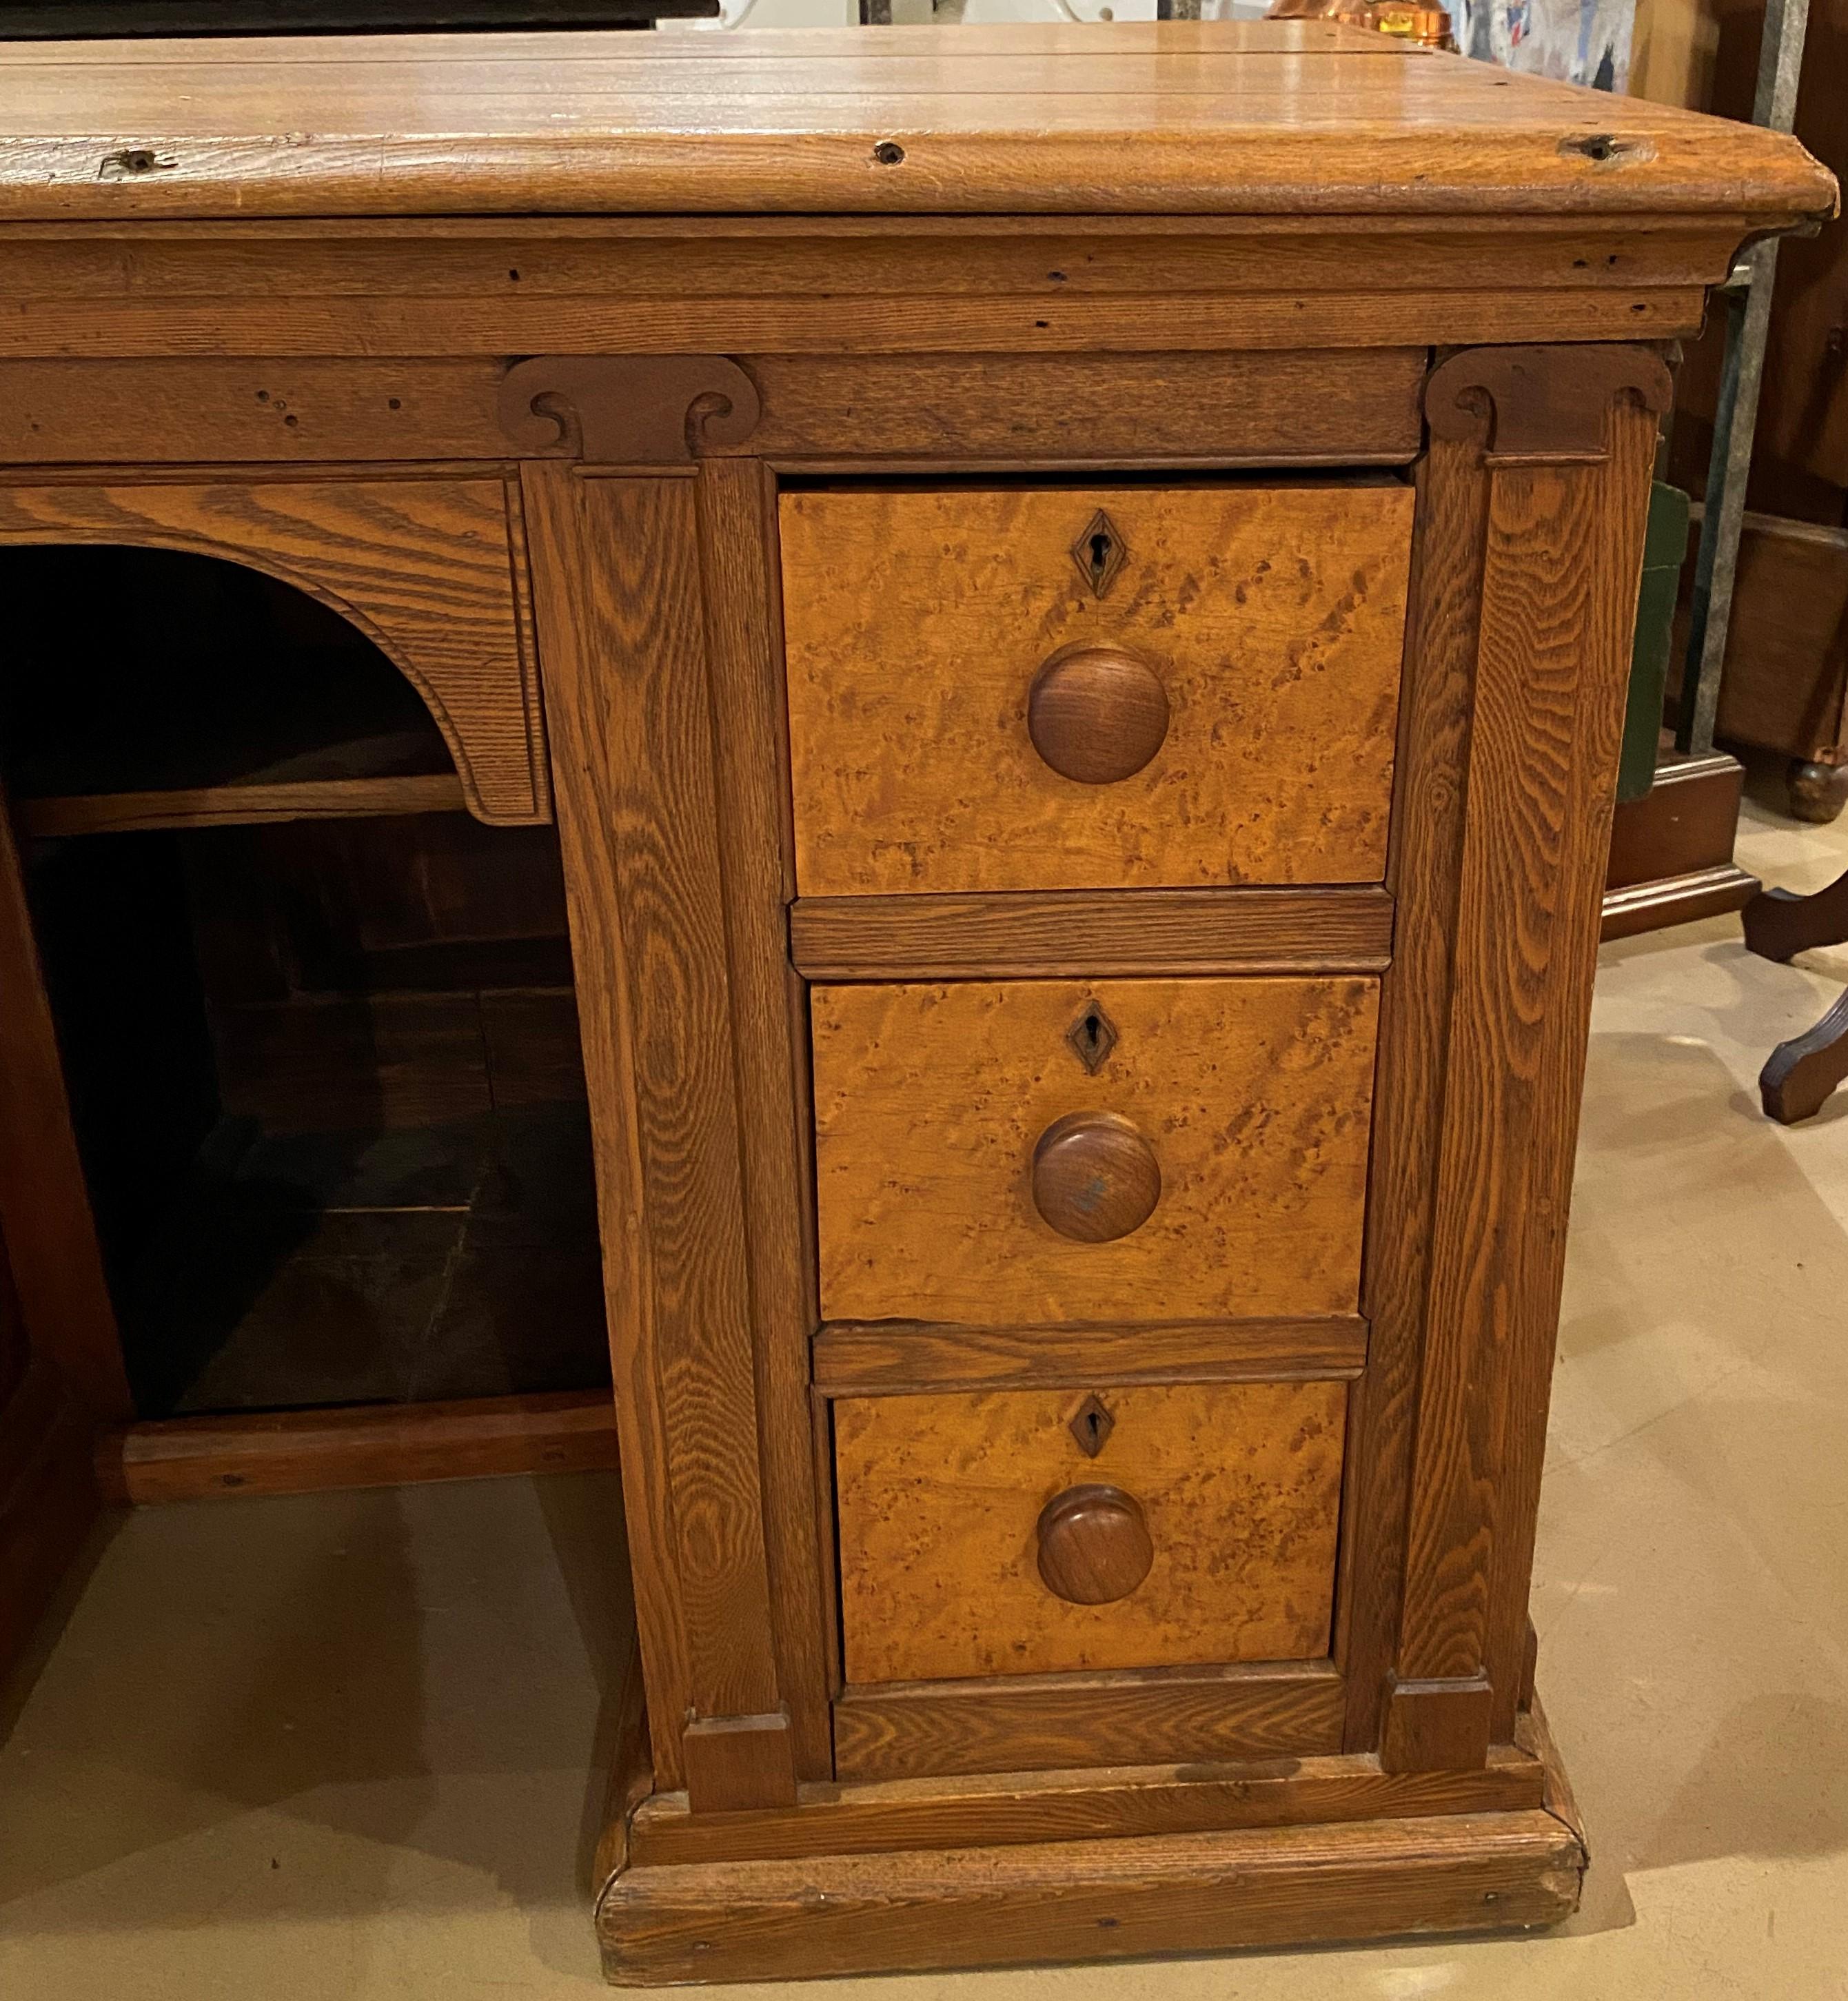 Early 20th Century Oak Store Paneled Counter or Desk w/ Birds Eye Drawer Fronts In Good Condition For Sale In Milford, NH